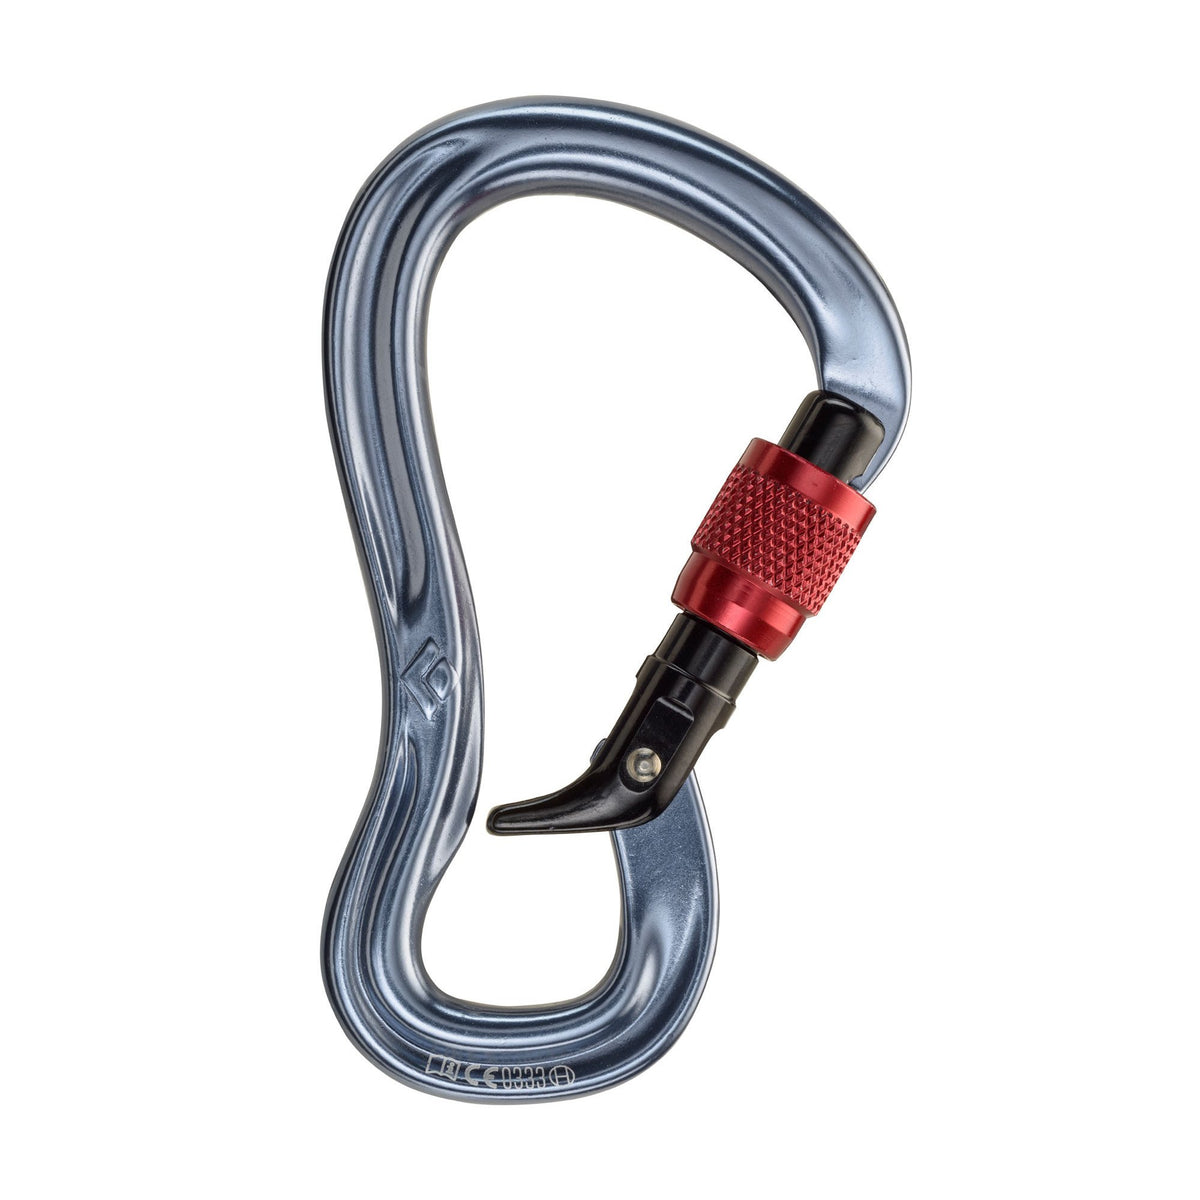 Black Diamond Gridlock HMS screwgate carabiner, in silver and red colours